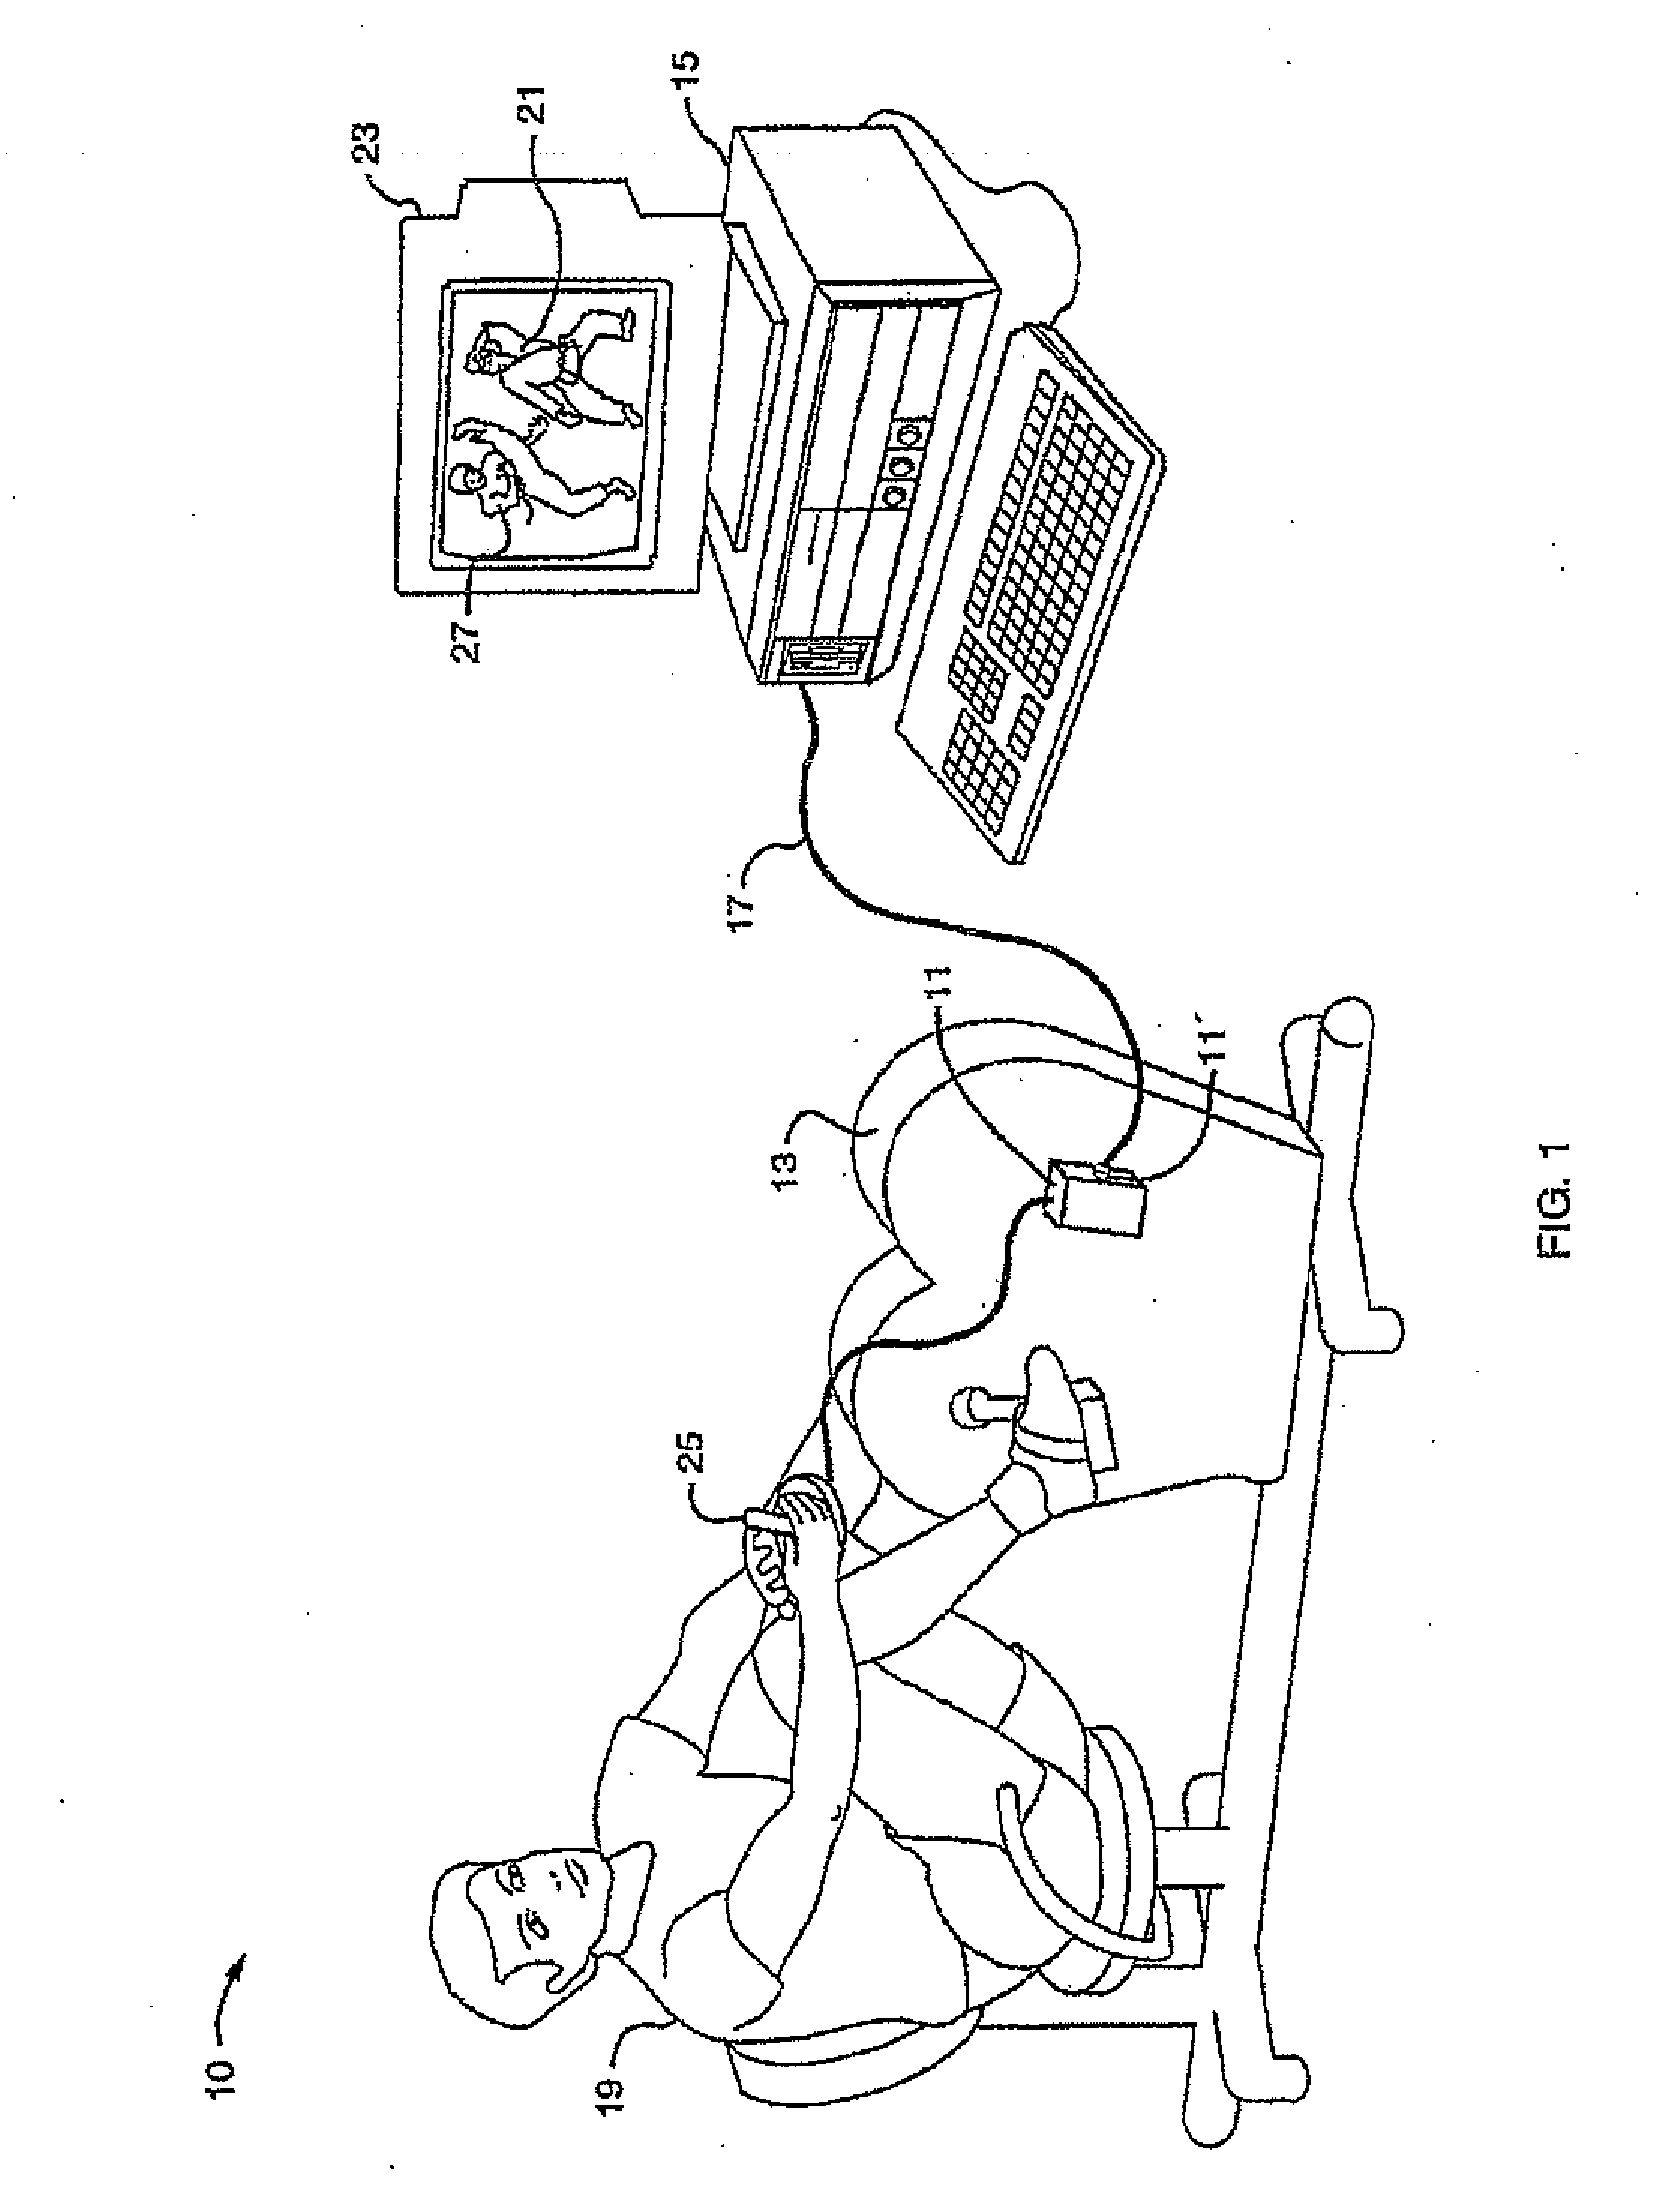 Systems and methods for using a video game to achieve an exercise objective